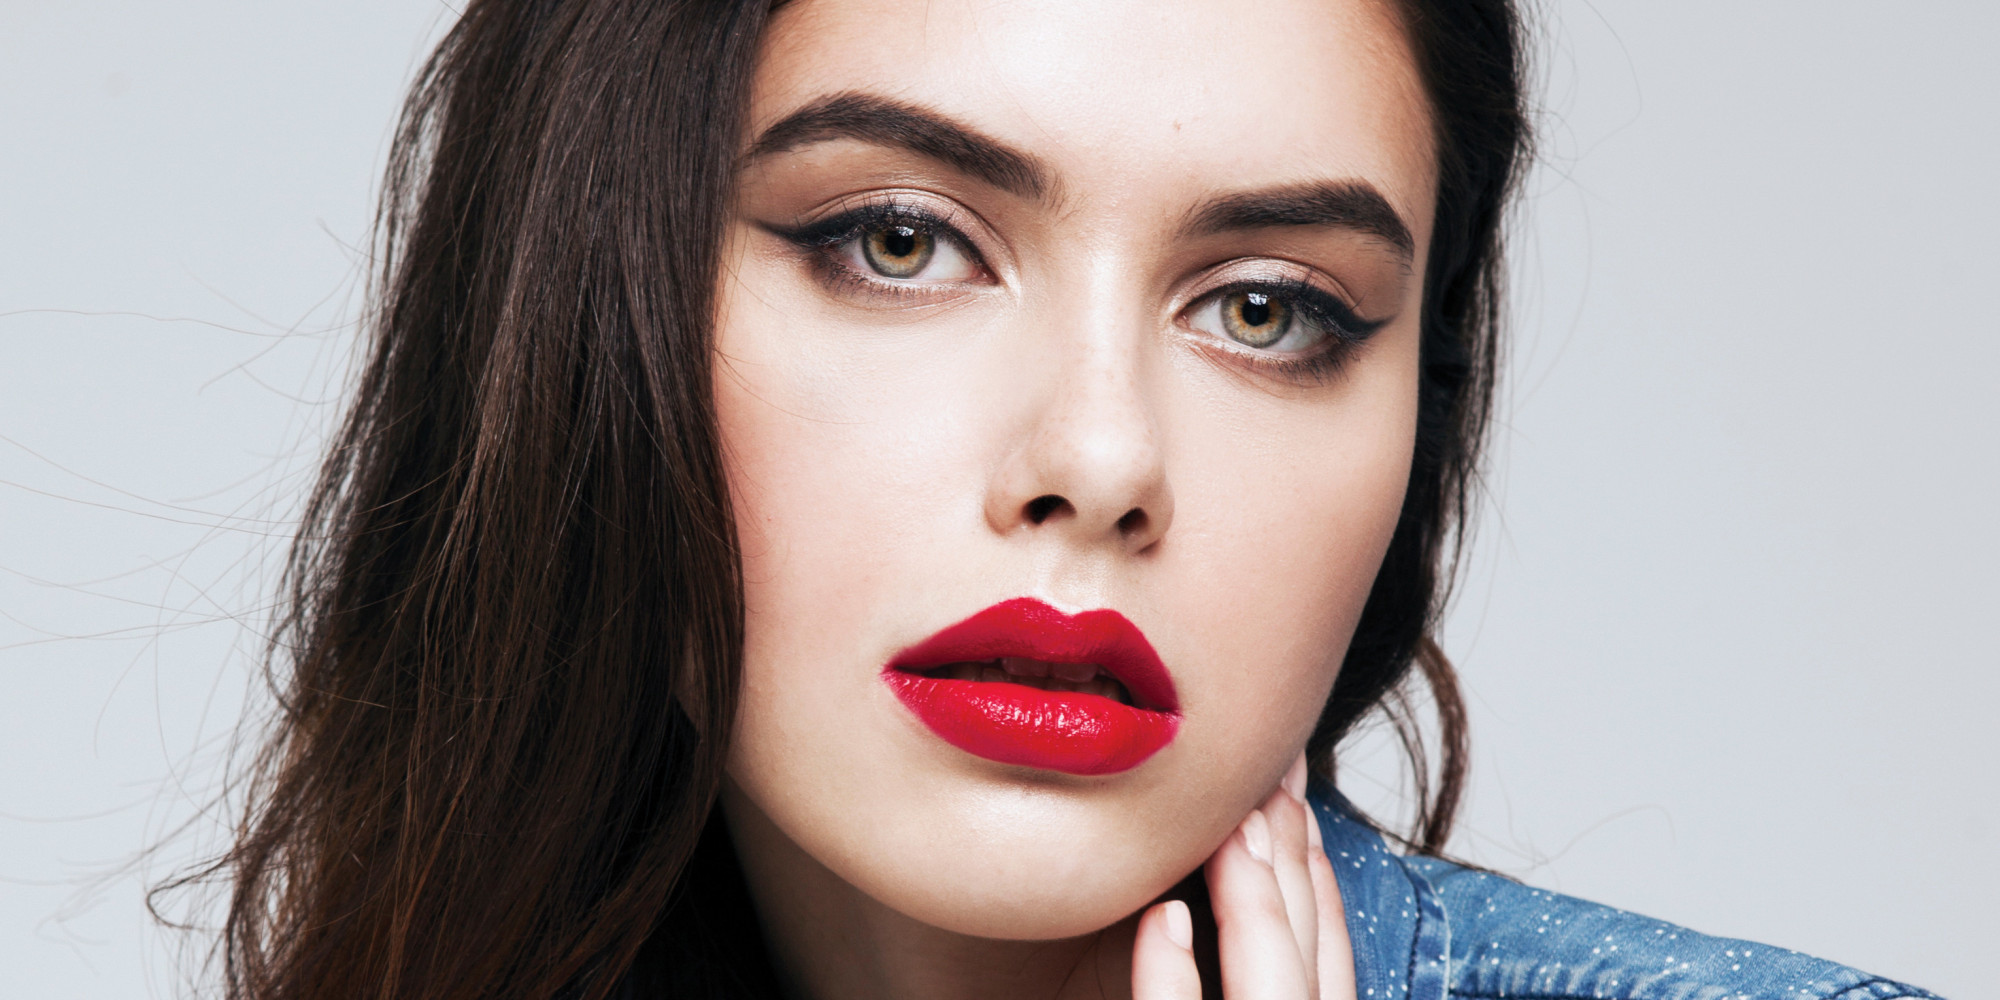 How To Get Fuller Lips With Just Makeup